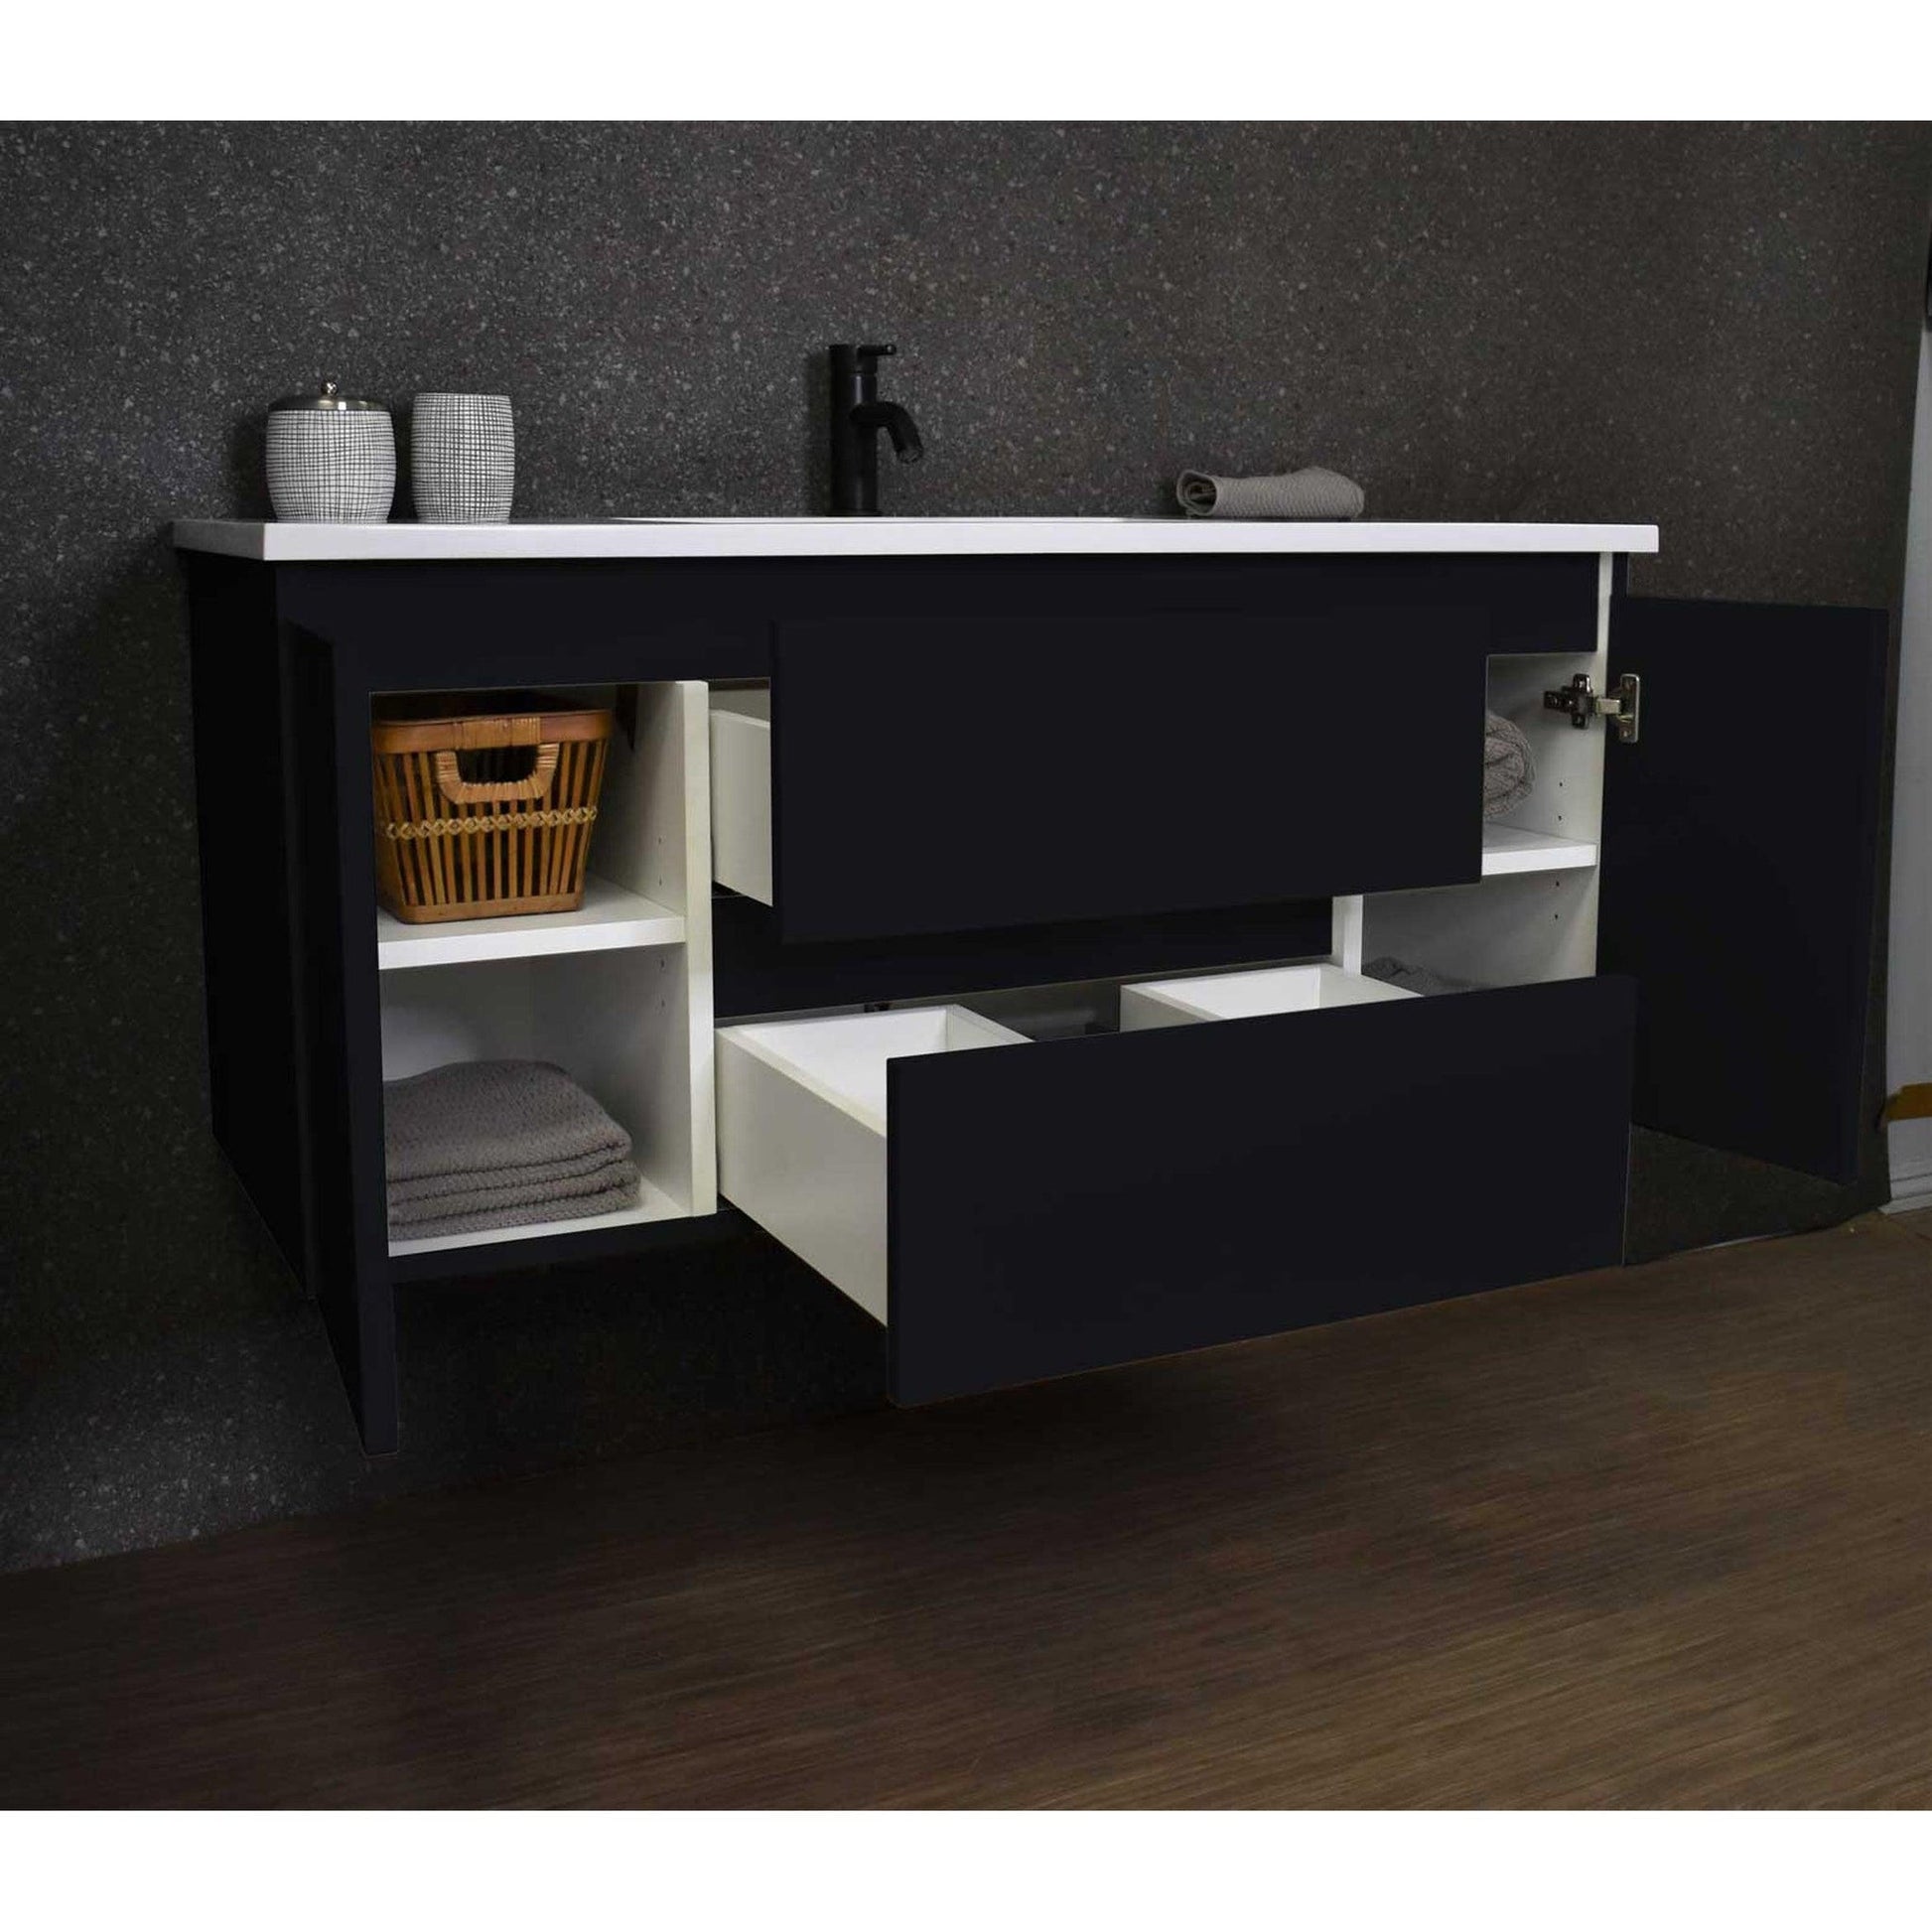 Volpa USA Salt 48" x 20" Glossy Black Wall-Mounted Floating Bathroom Vanity With Drawers, Acrylic Top and Integrated Acrylic Sink